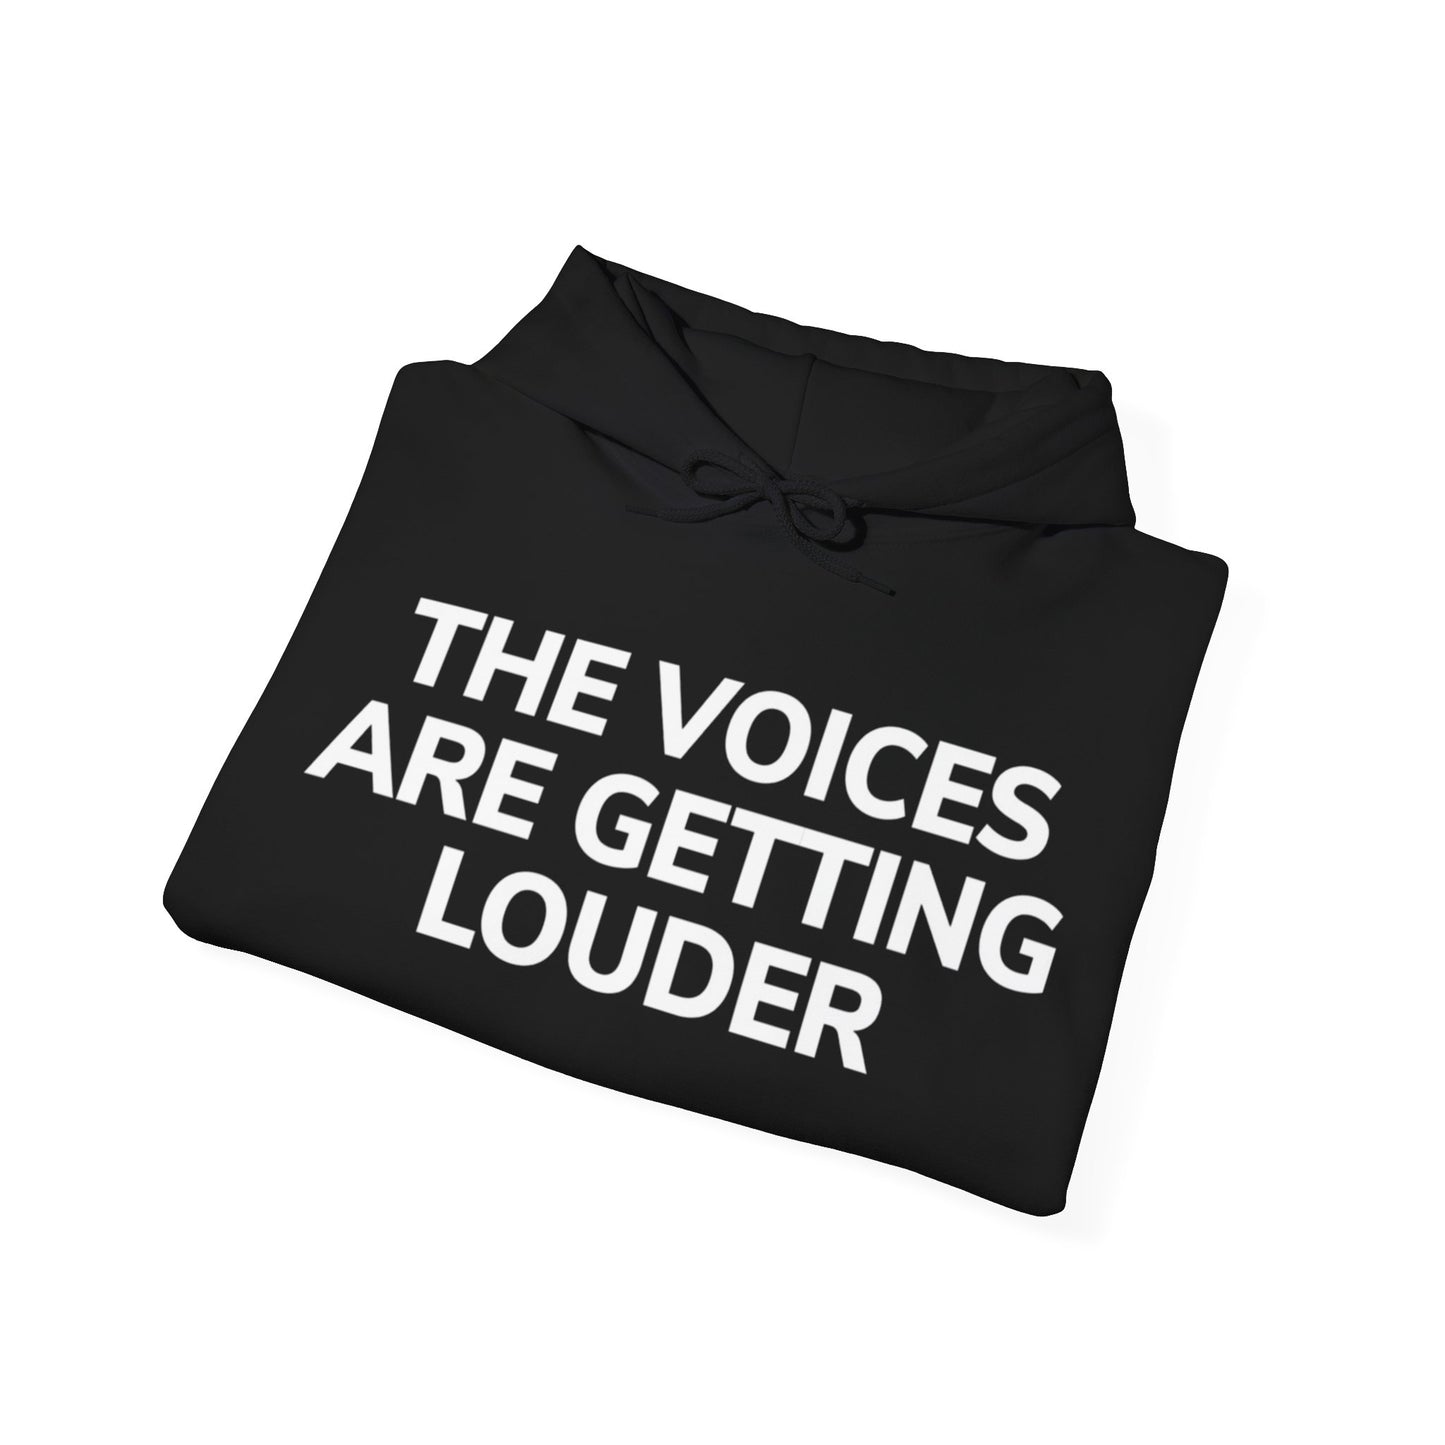 THE VOICES ARE GETTING LOUDER (HOODIE)